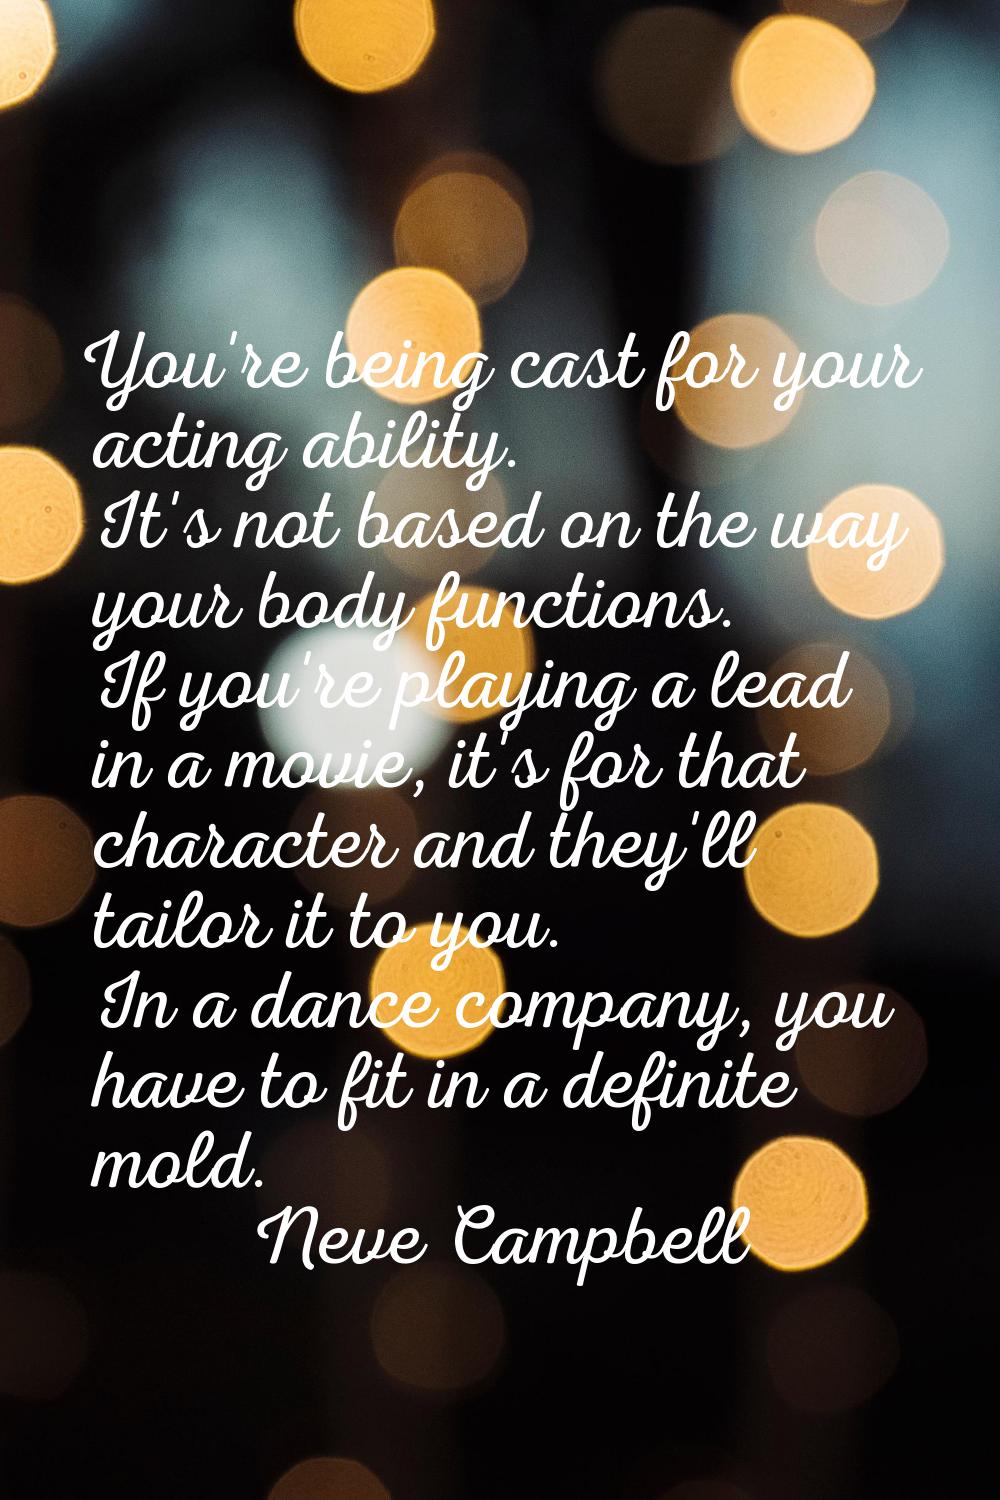 You're being cast for your acting ability. It's not based on the way your body functions. If you're